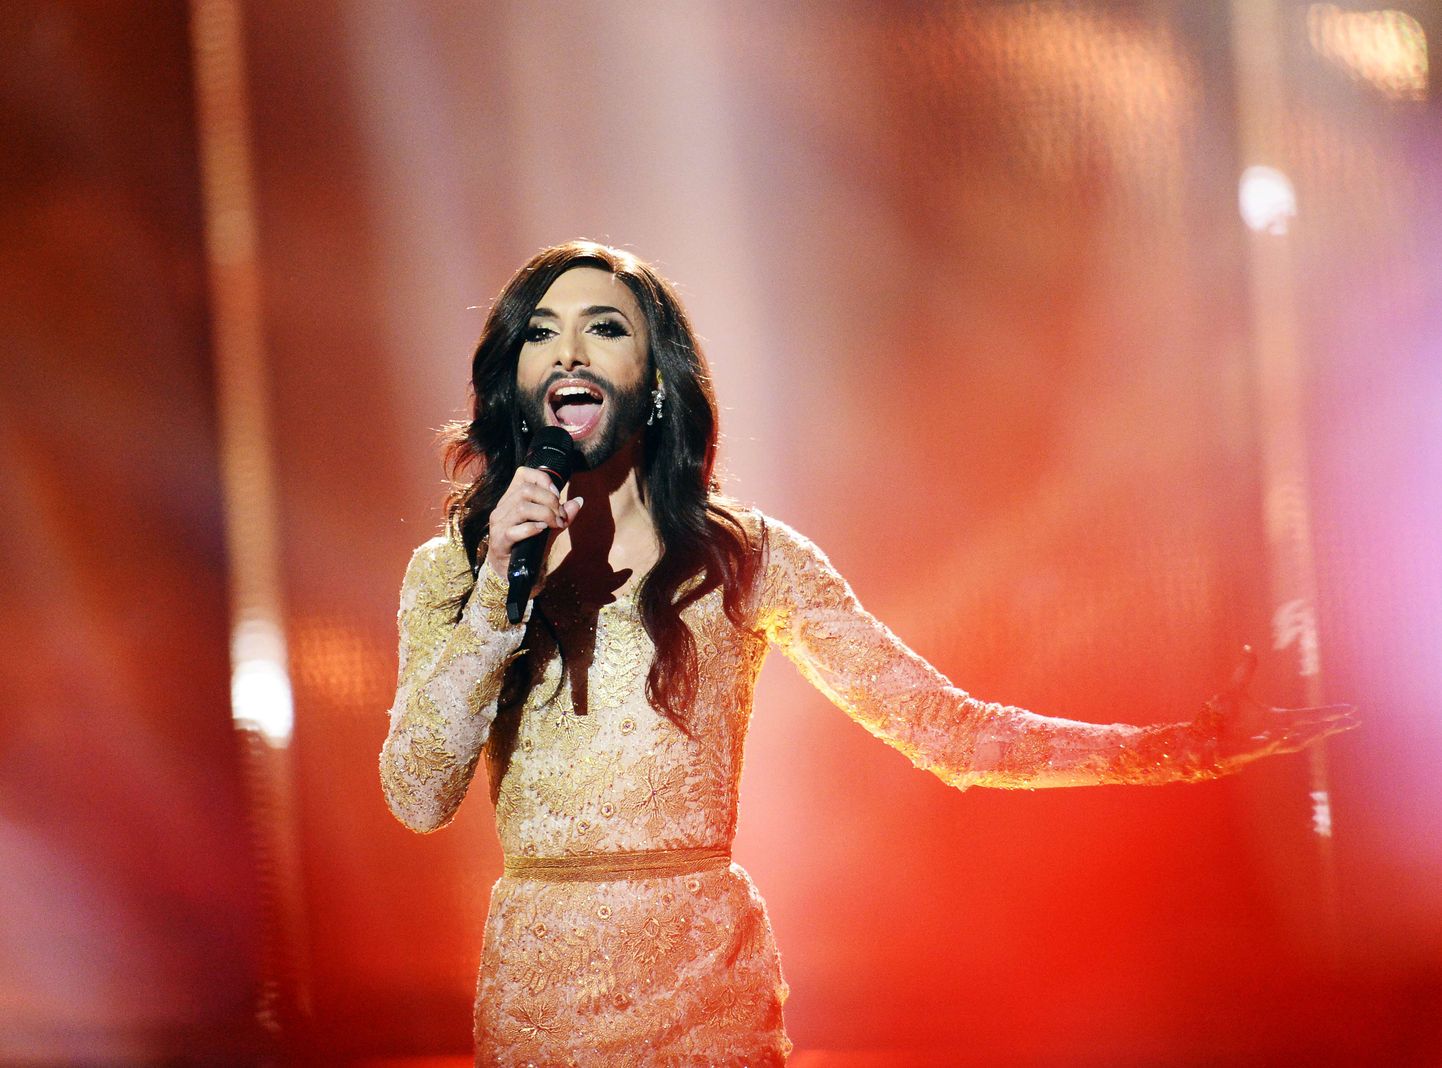 Conchita Wurst representing Austria performs the song "Rise Like A Phoenix" during the dress rehearsal for the Eurovision Song Contest 2014 Grand Final in Copenhagen, Denmark, on May 9, 2014. AFP PHOTO/JONATHAN NACKSTRAND